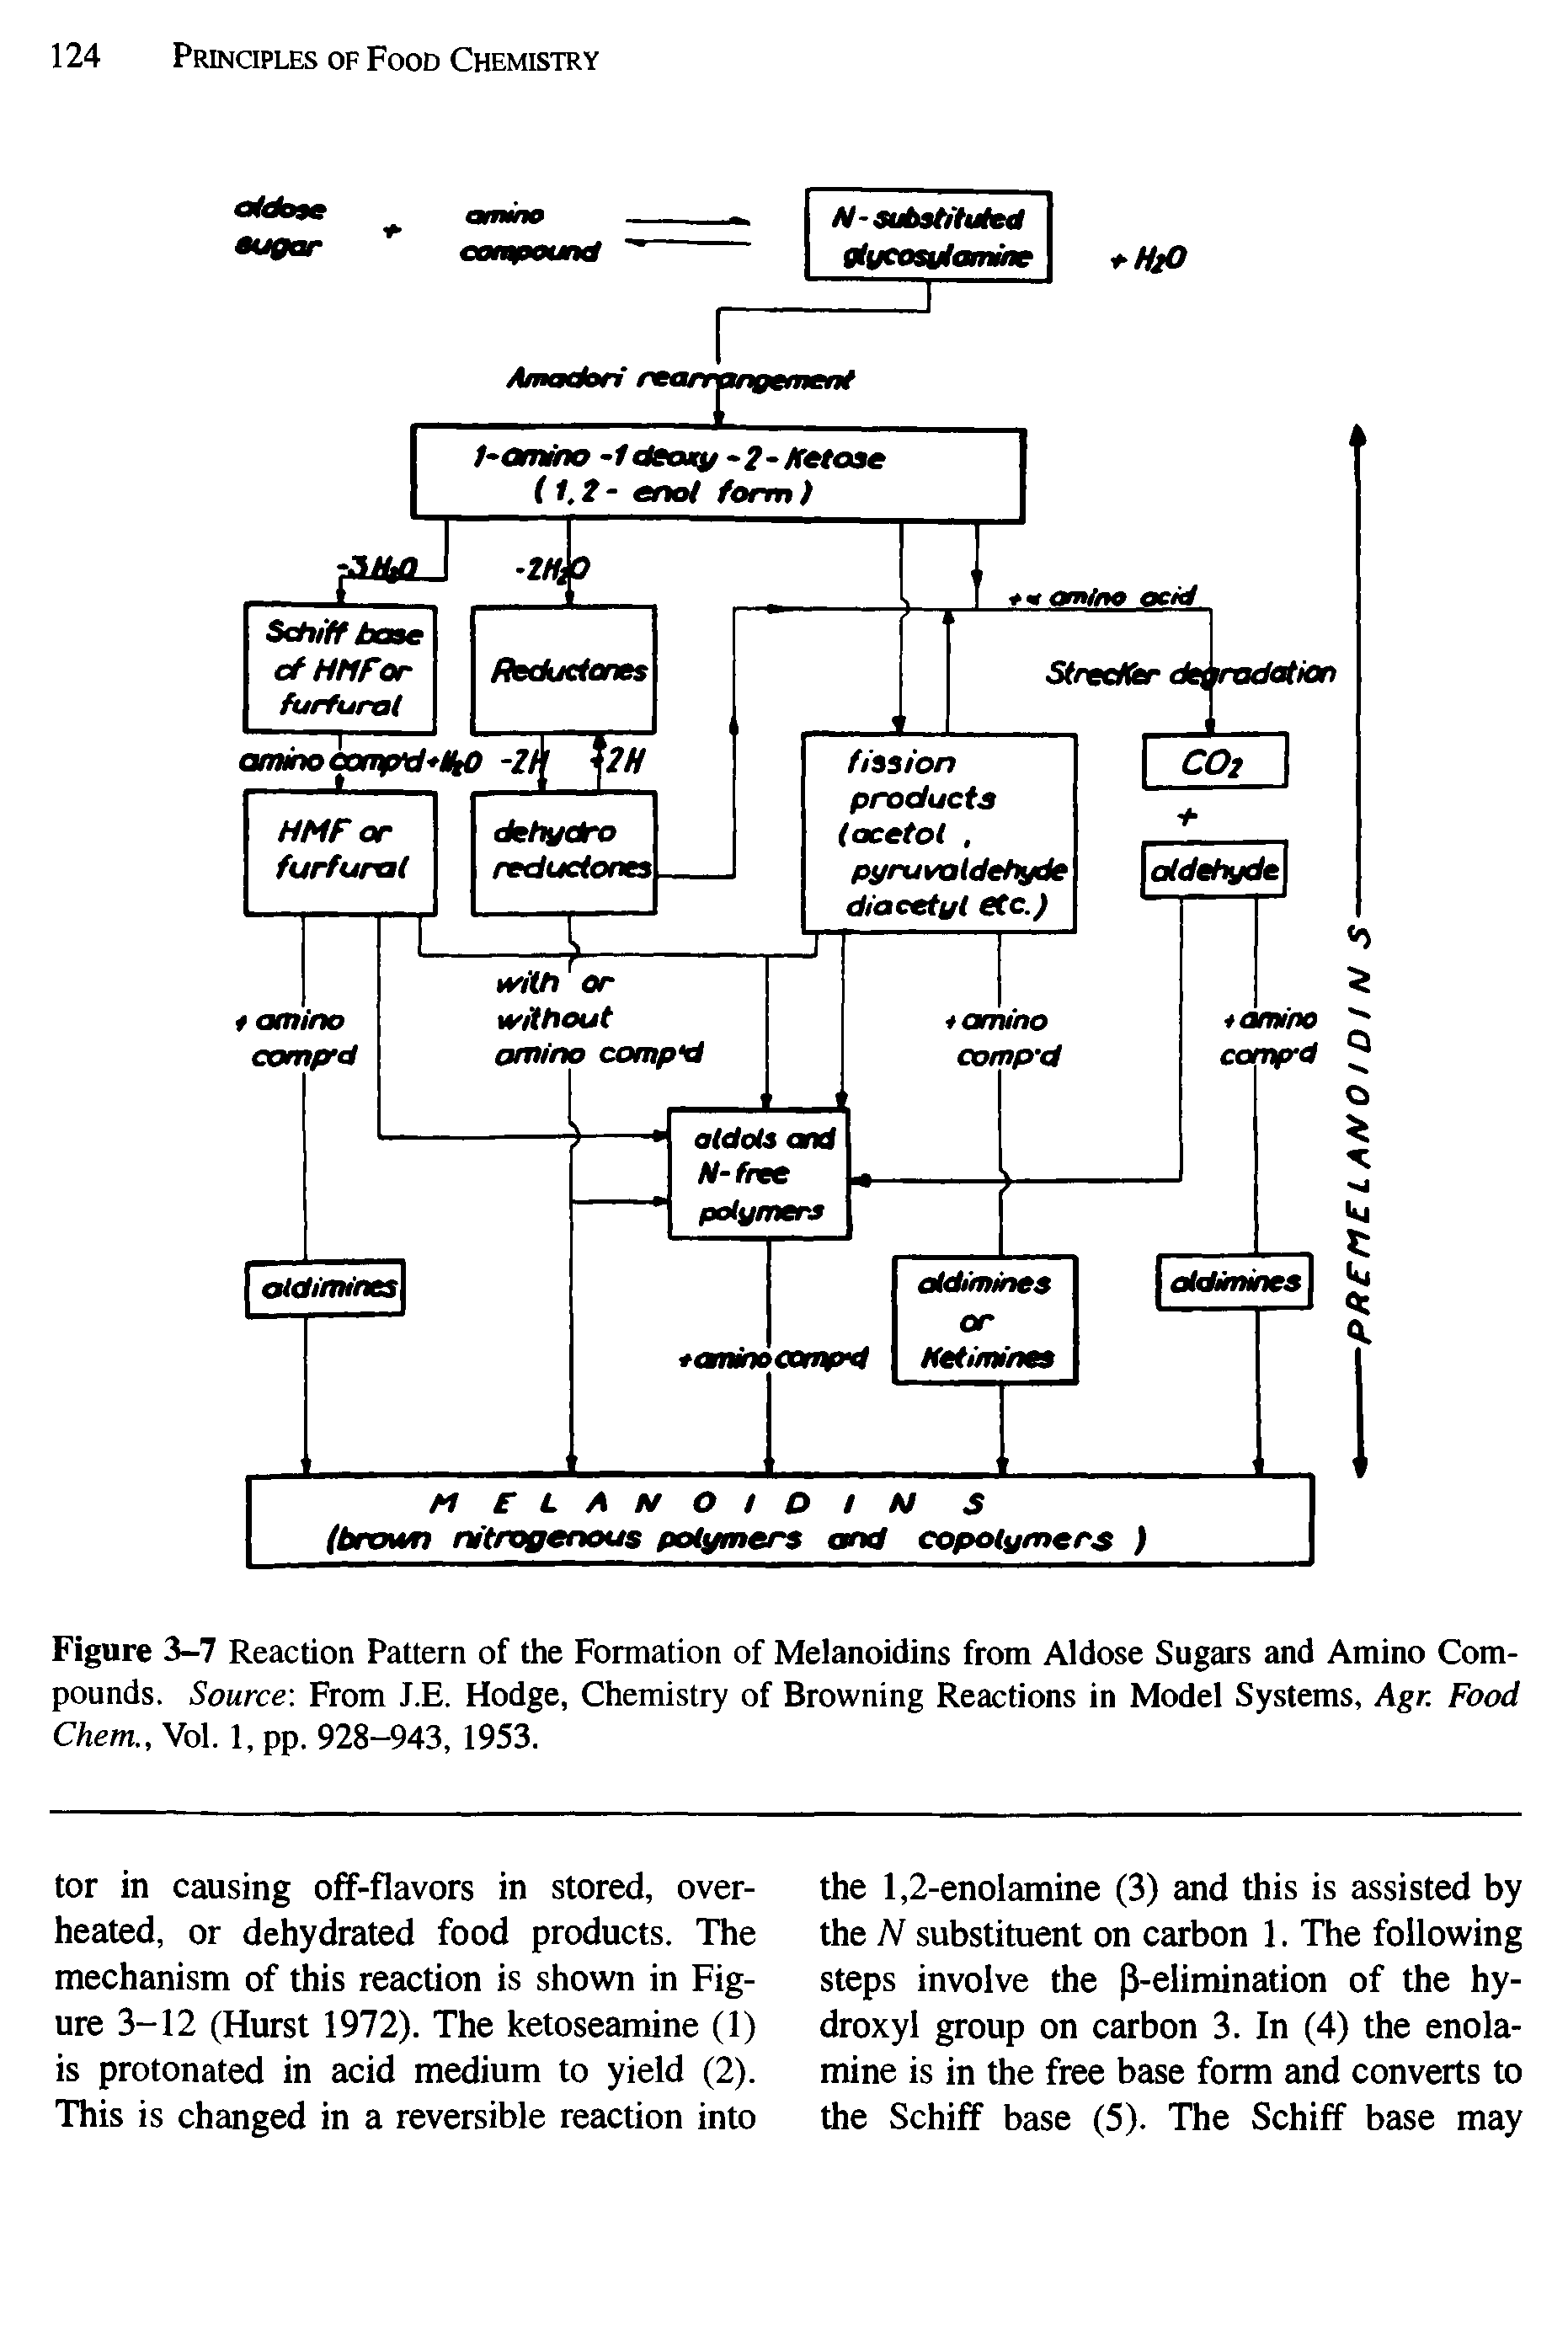 Figure 3-7 Reaction Pattern of the Formation of Melanoidins from Aldose Sugars and Amino Compounds. Source From J.E. Hodge, Chemistry of Browning Reactions in Model Systems, Agr. Food Chem., Vol. 1, pp. 928-943, 1953.